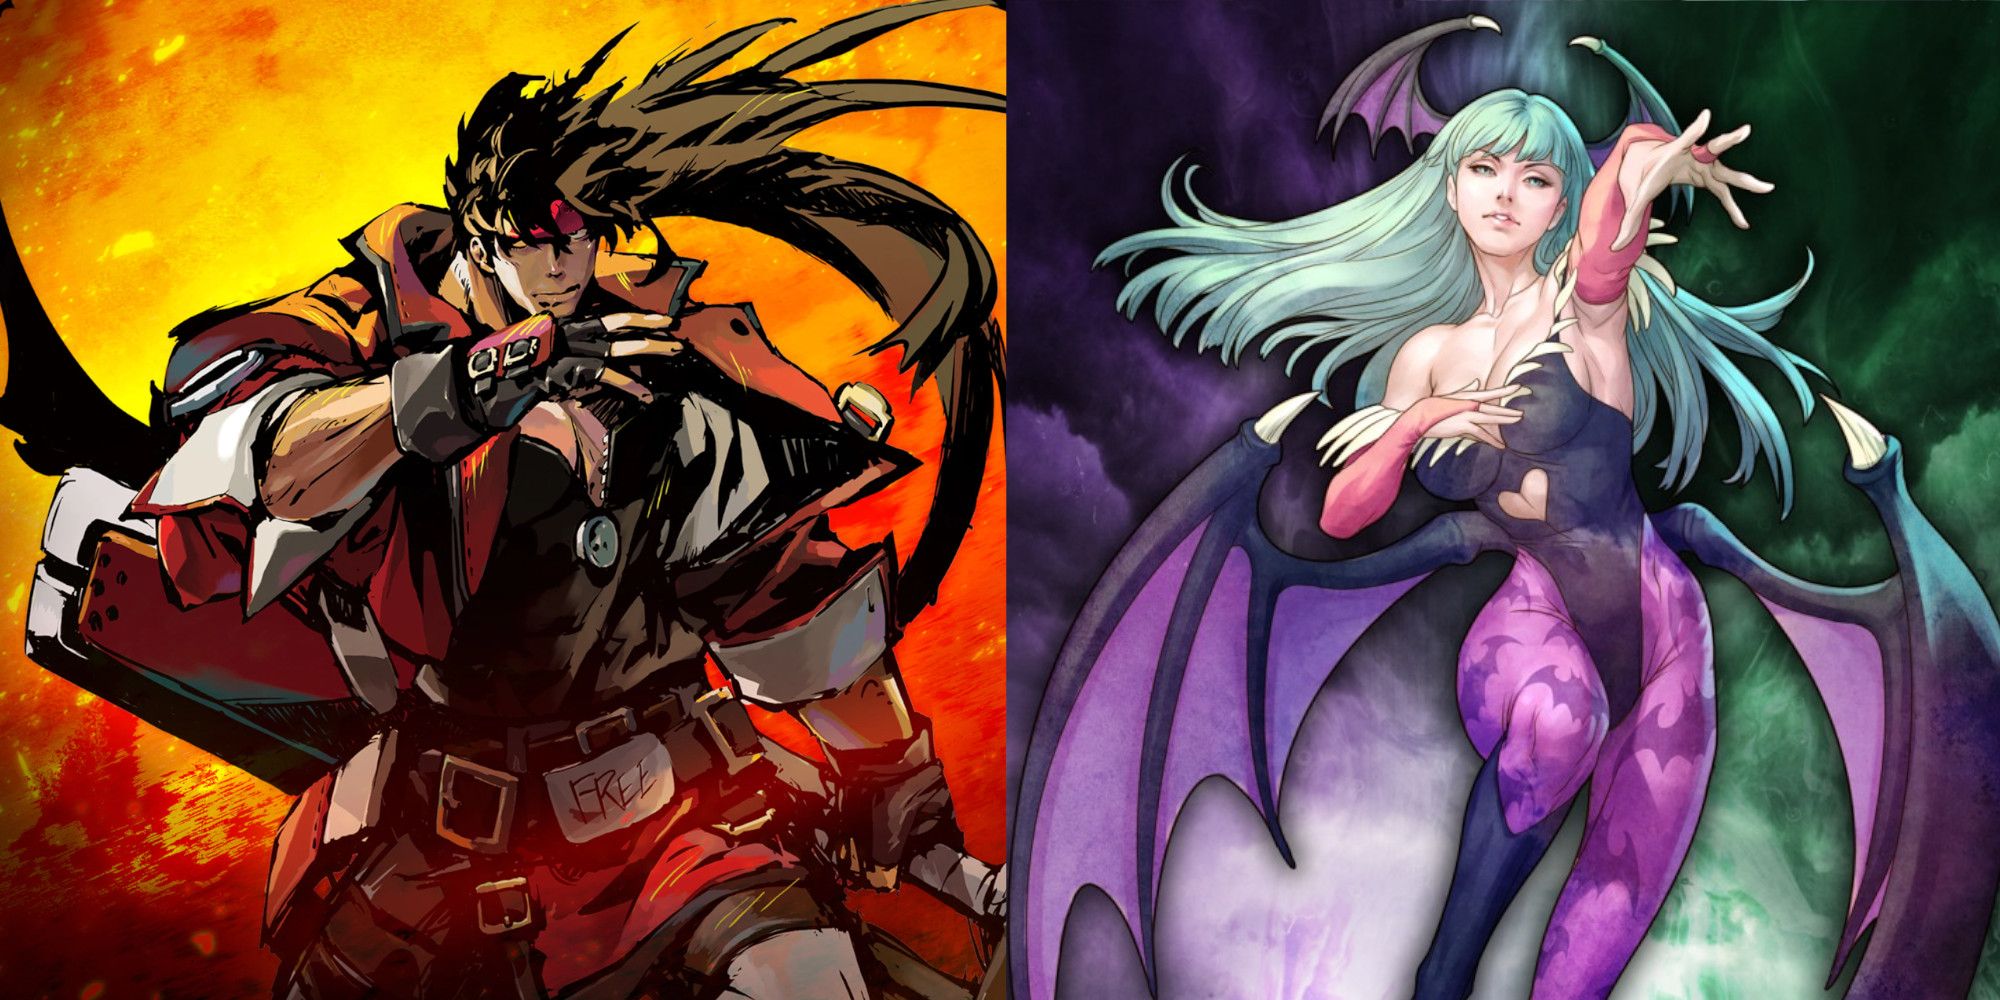 Sol Badguy from Guilty Gear and Morrigan from Darkstalkers